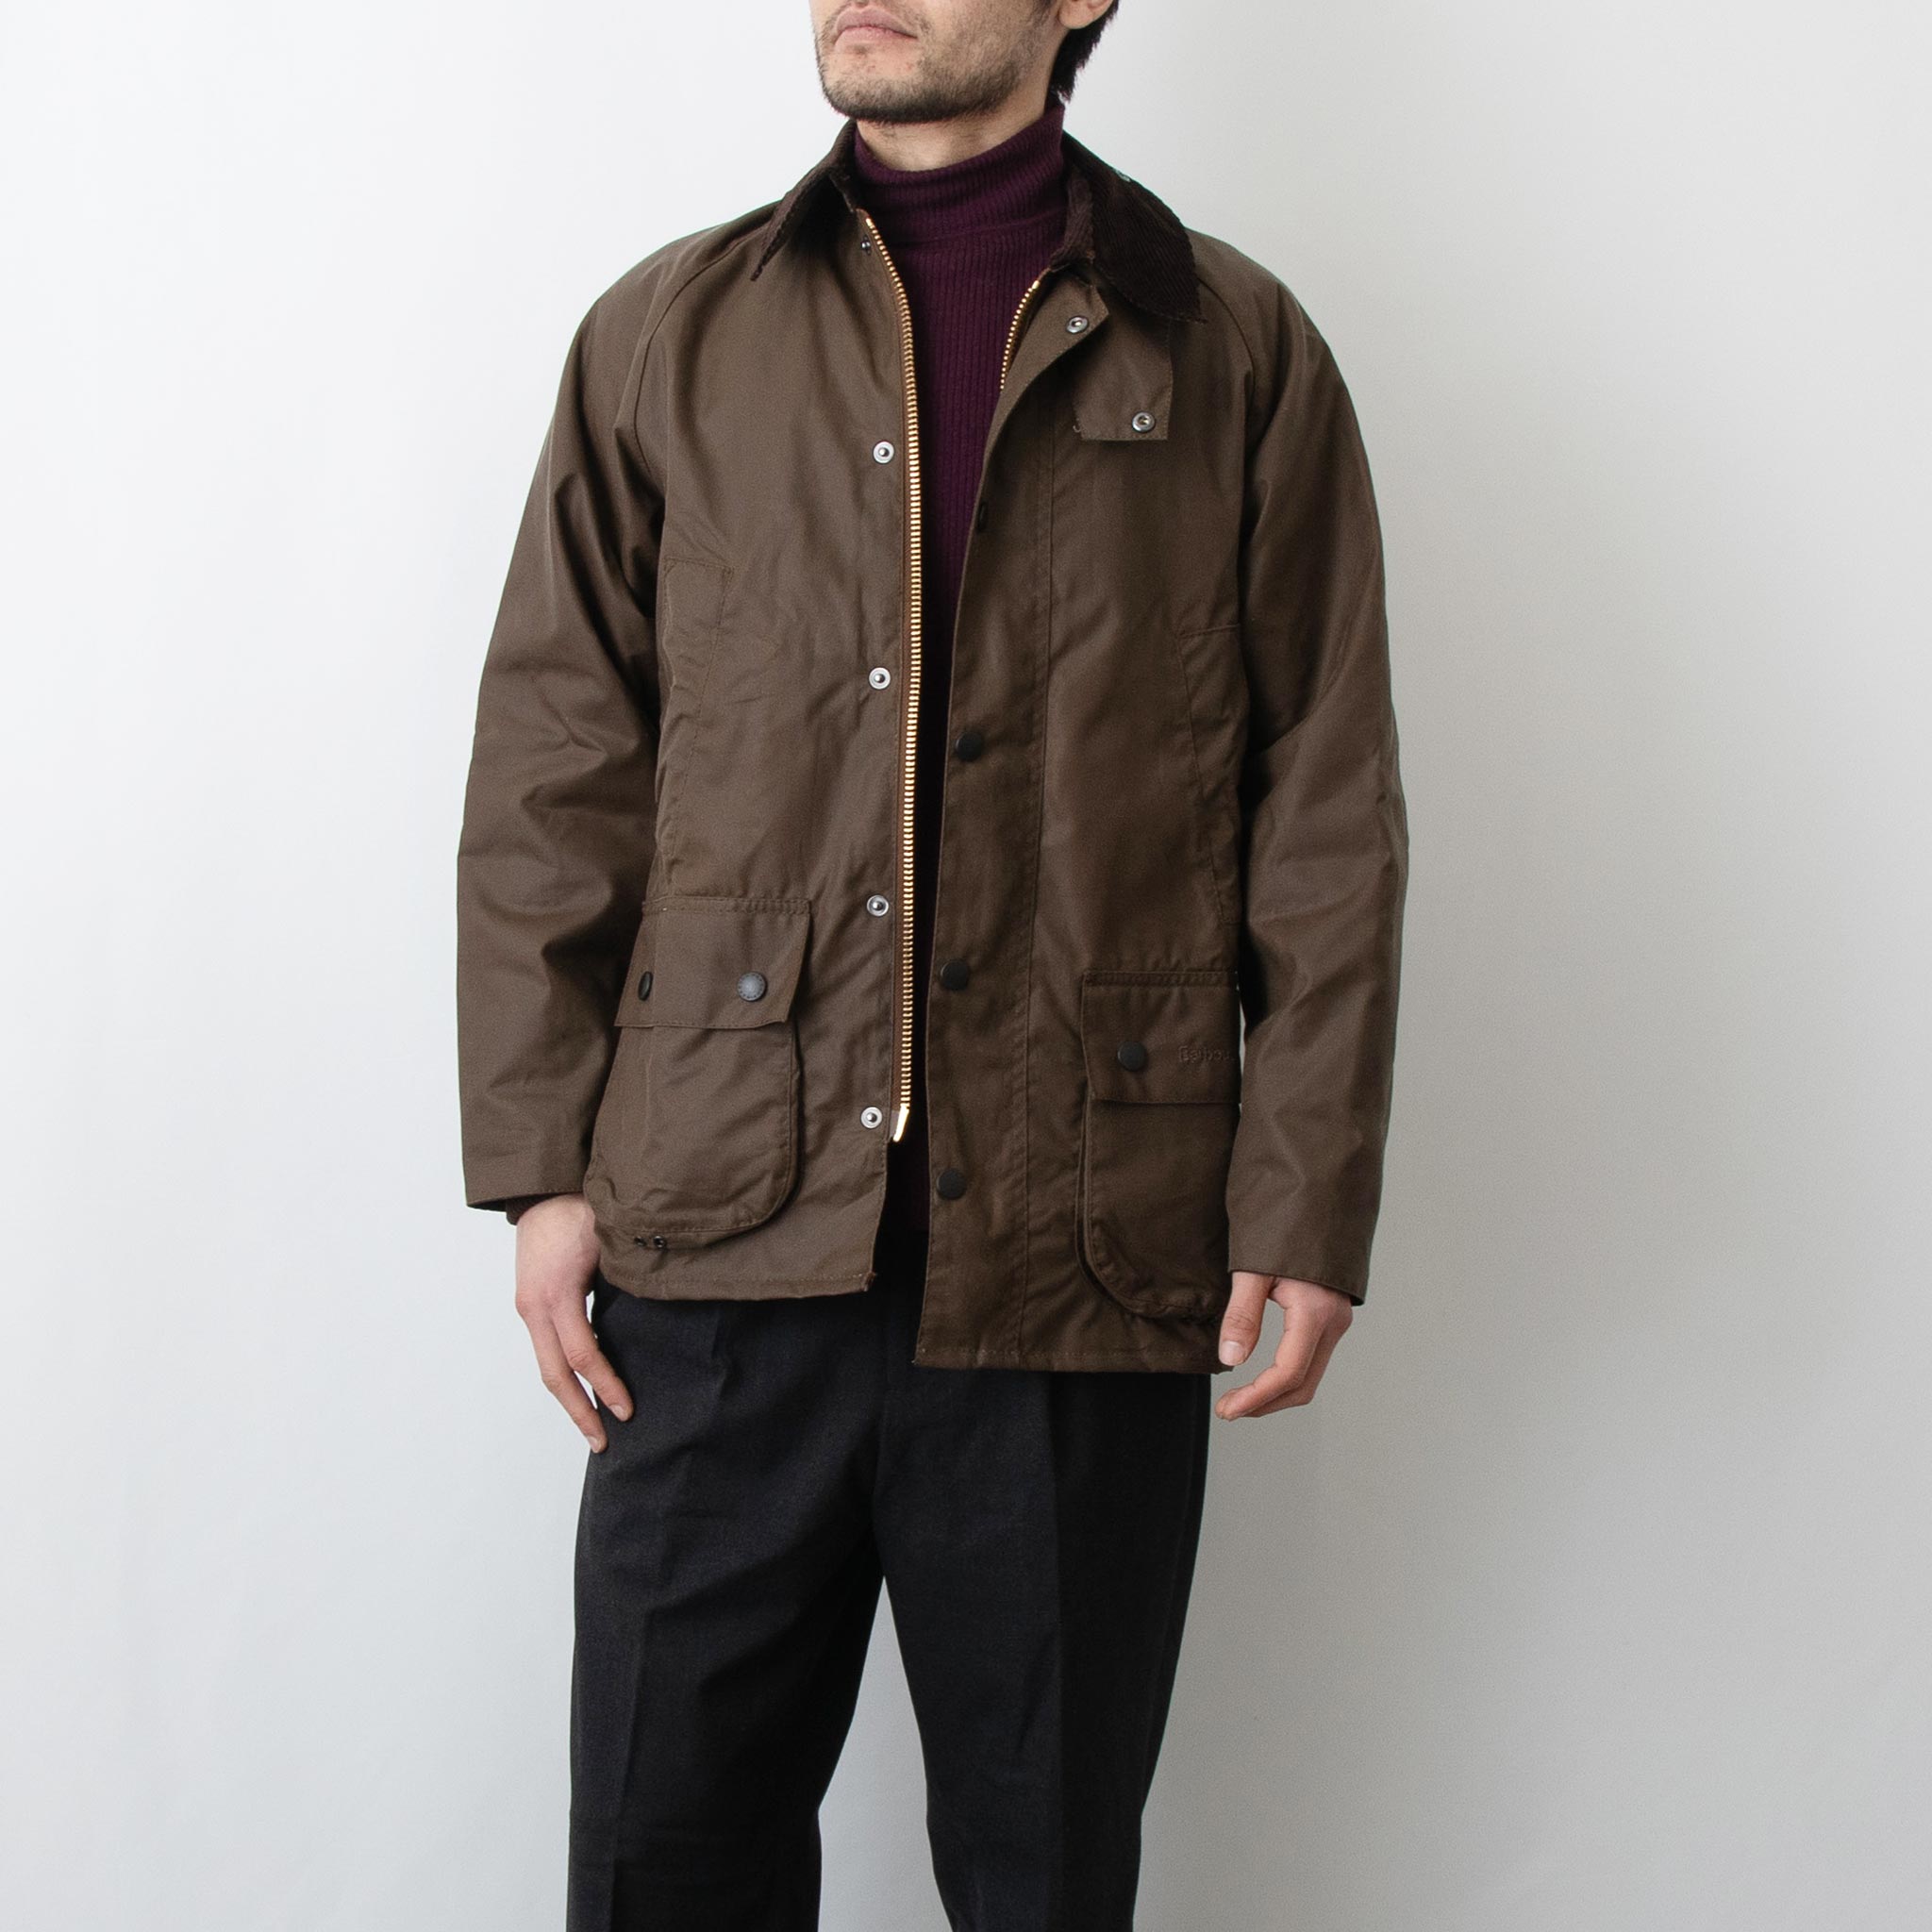 BARBOUR - BEDALE WAX JACKET MWX0018 BE51 – CHG